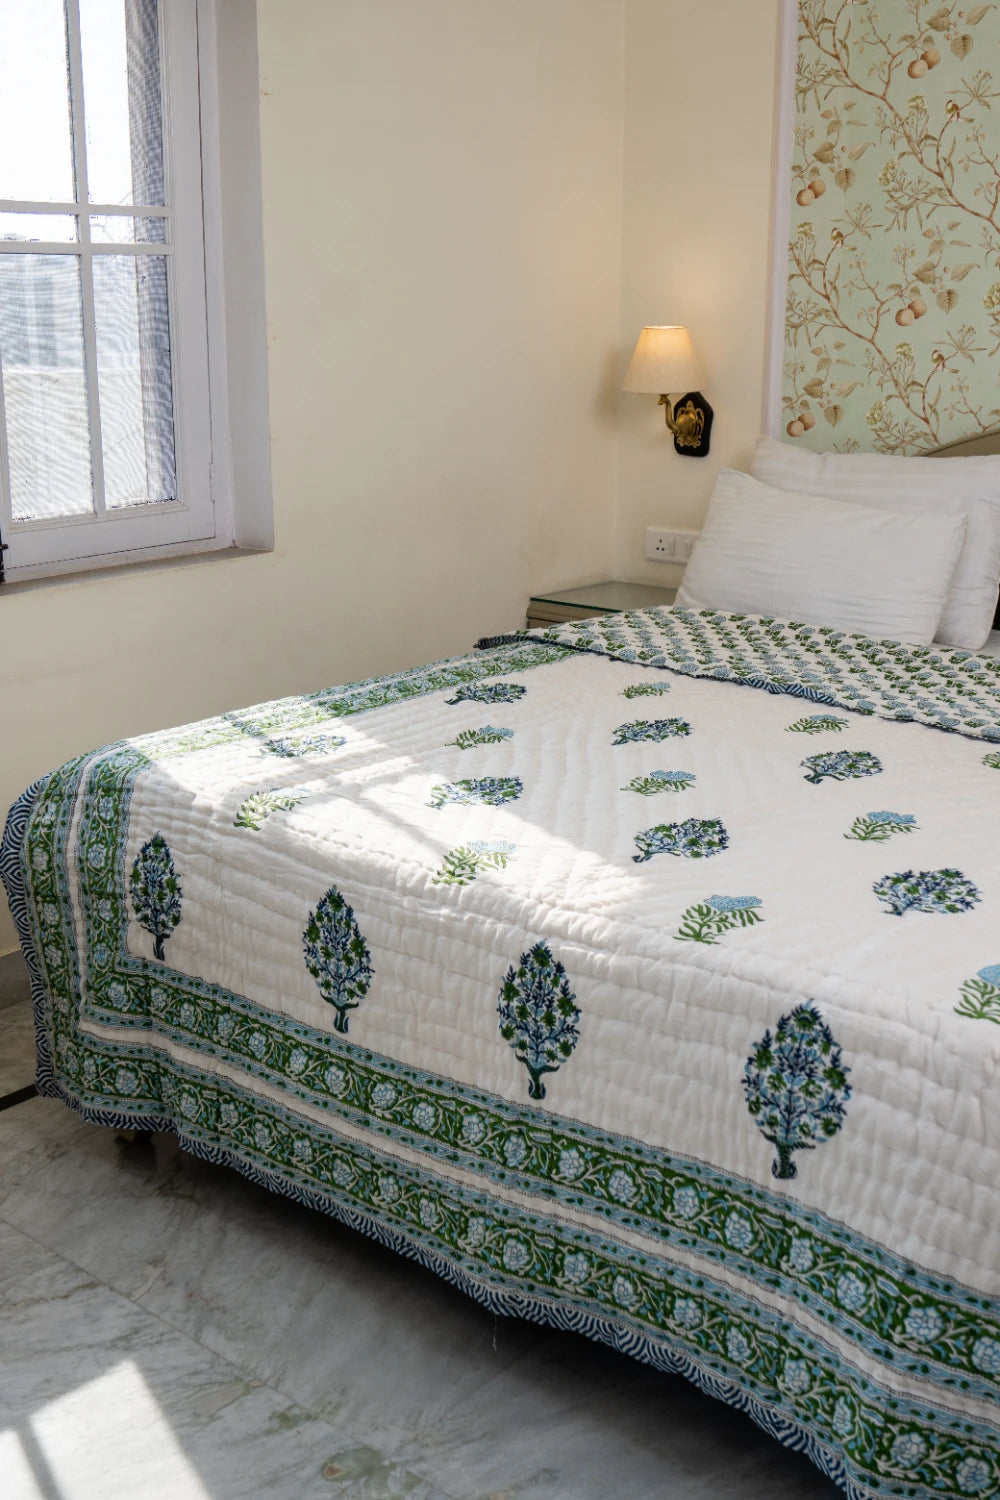 All-Season Soft Quilt: Top Quality Cotton Bedding